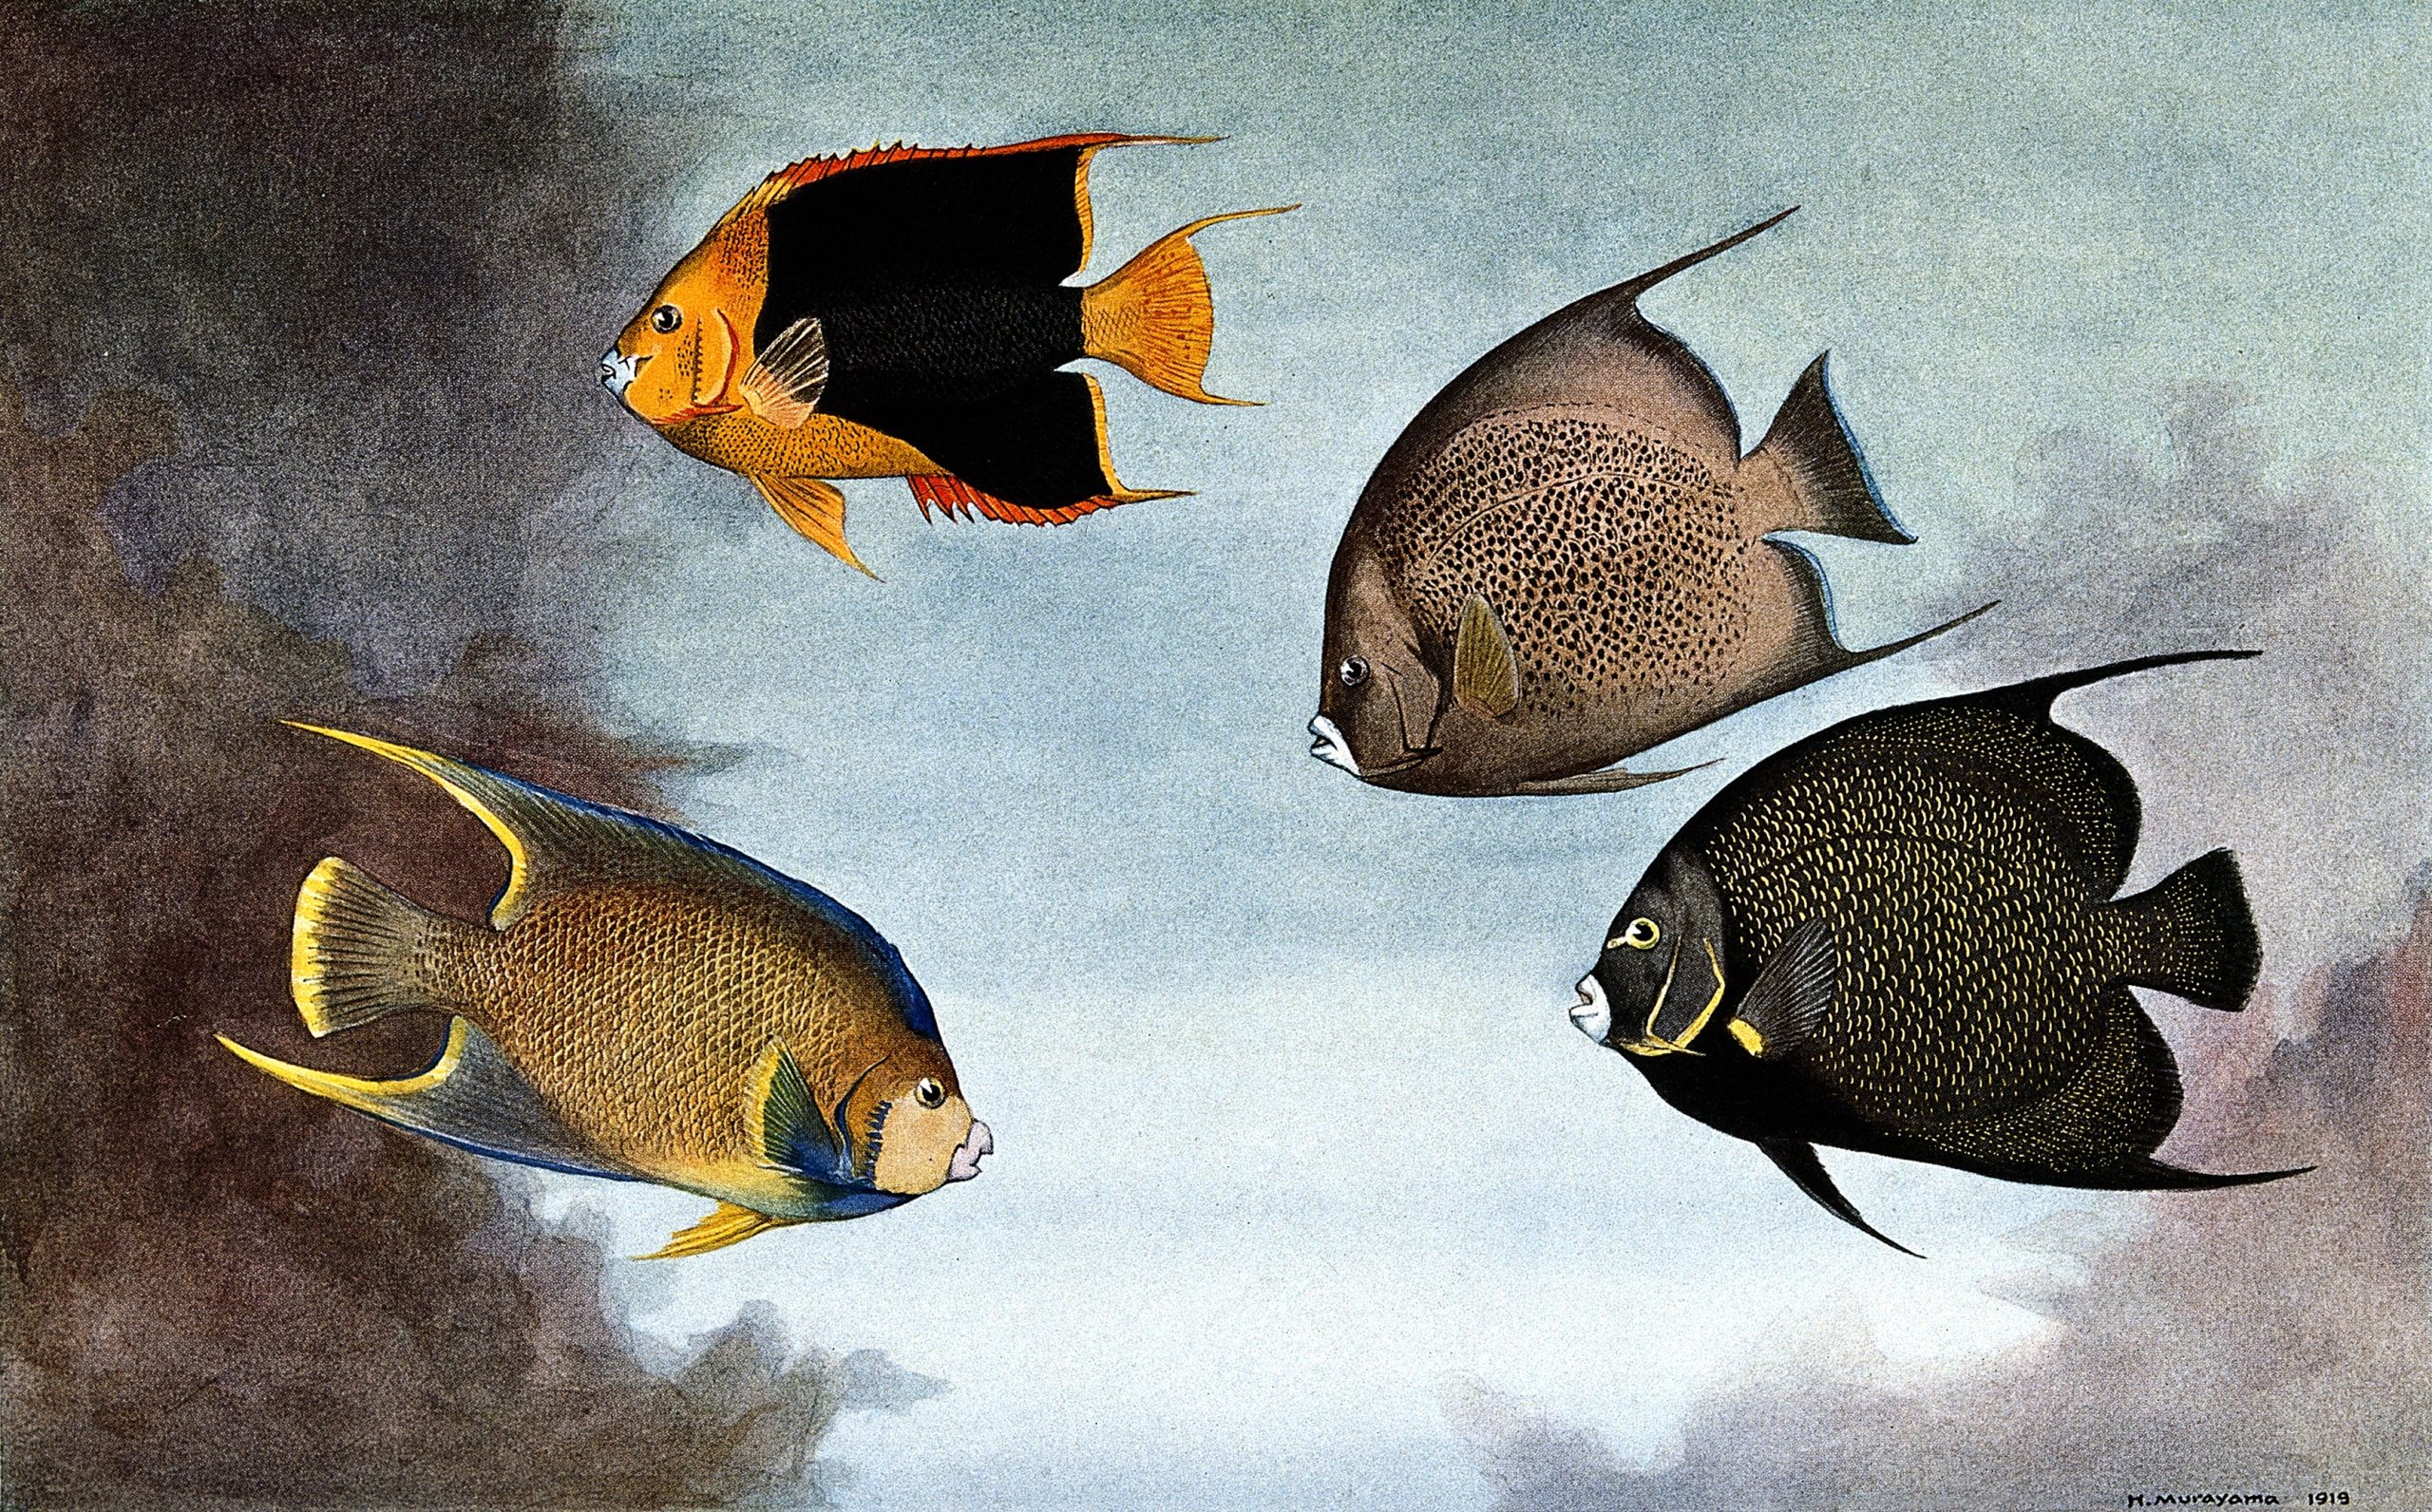 Four fish swimming in cloudy waters